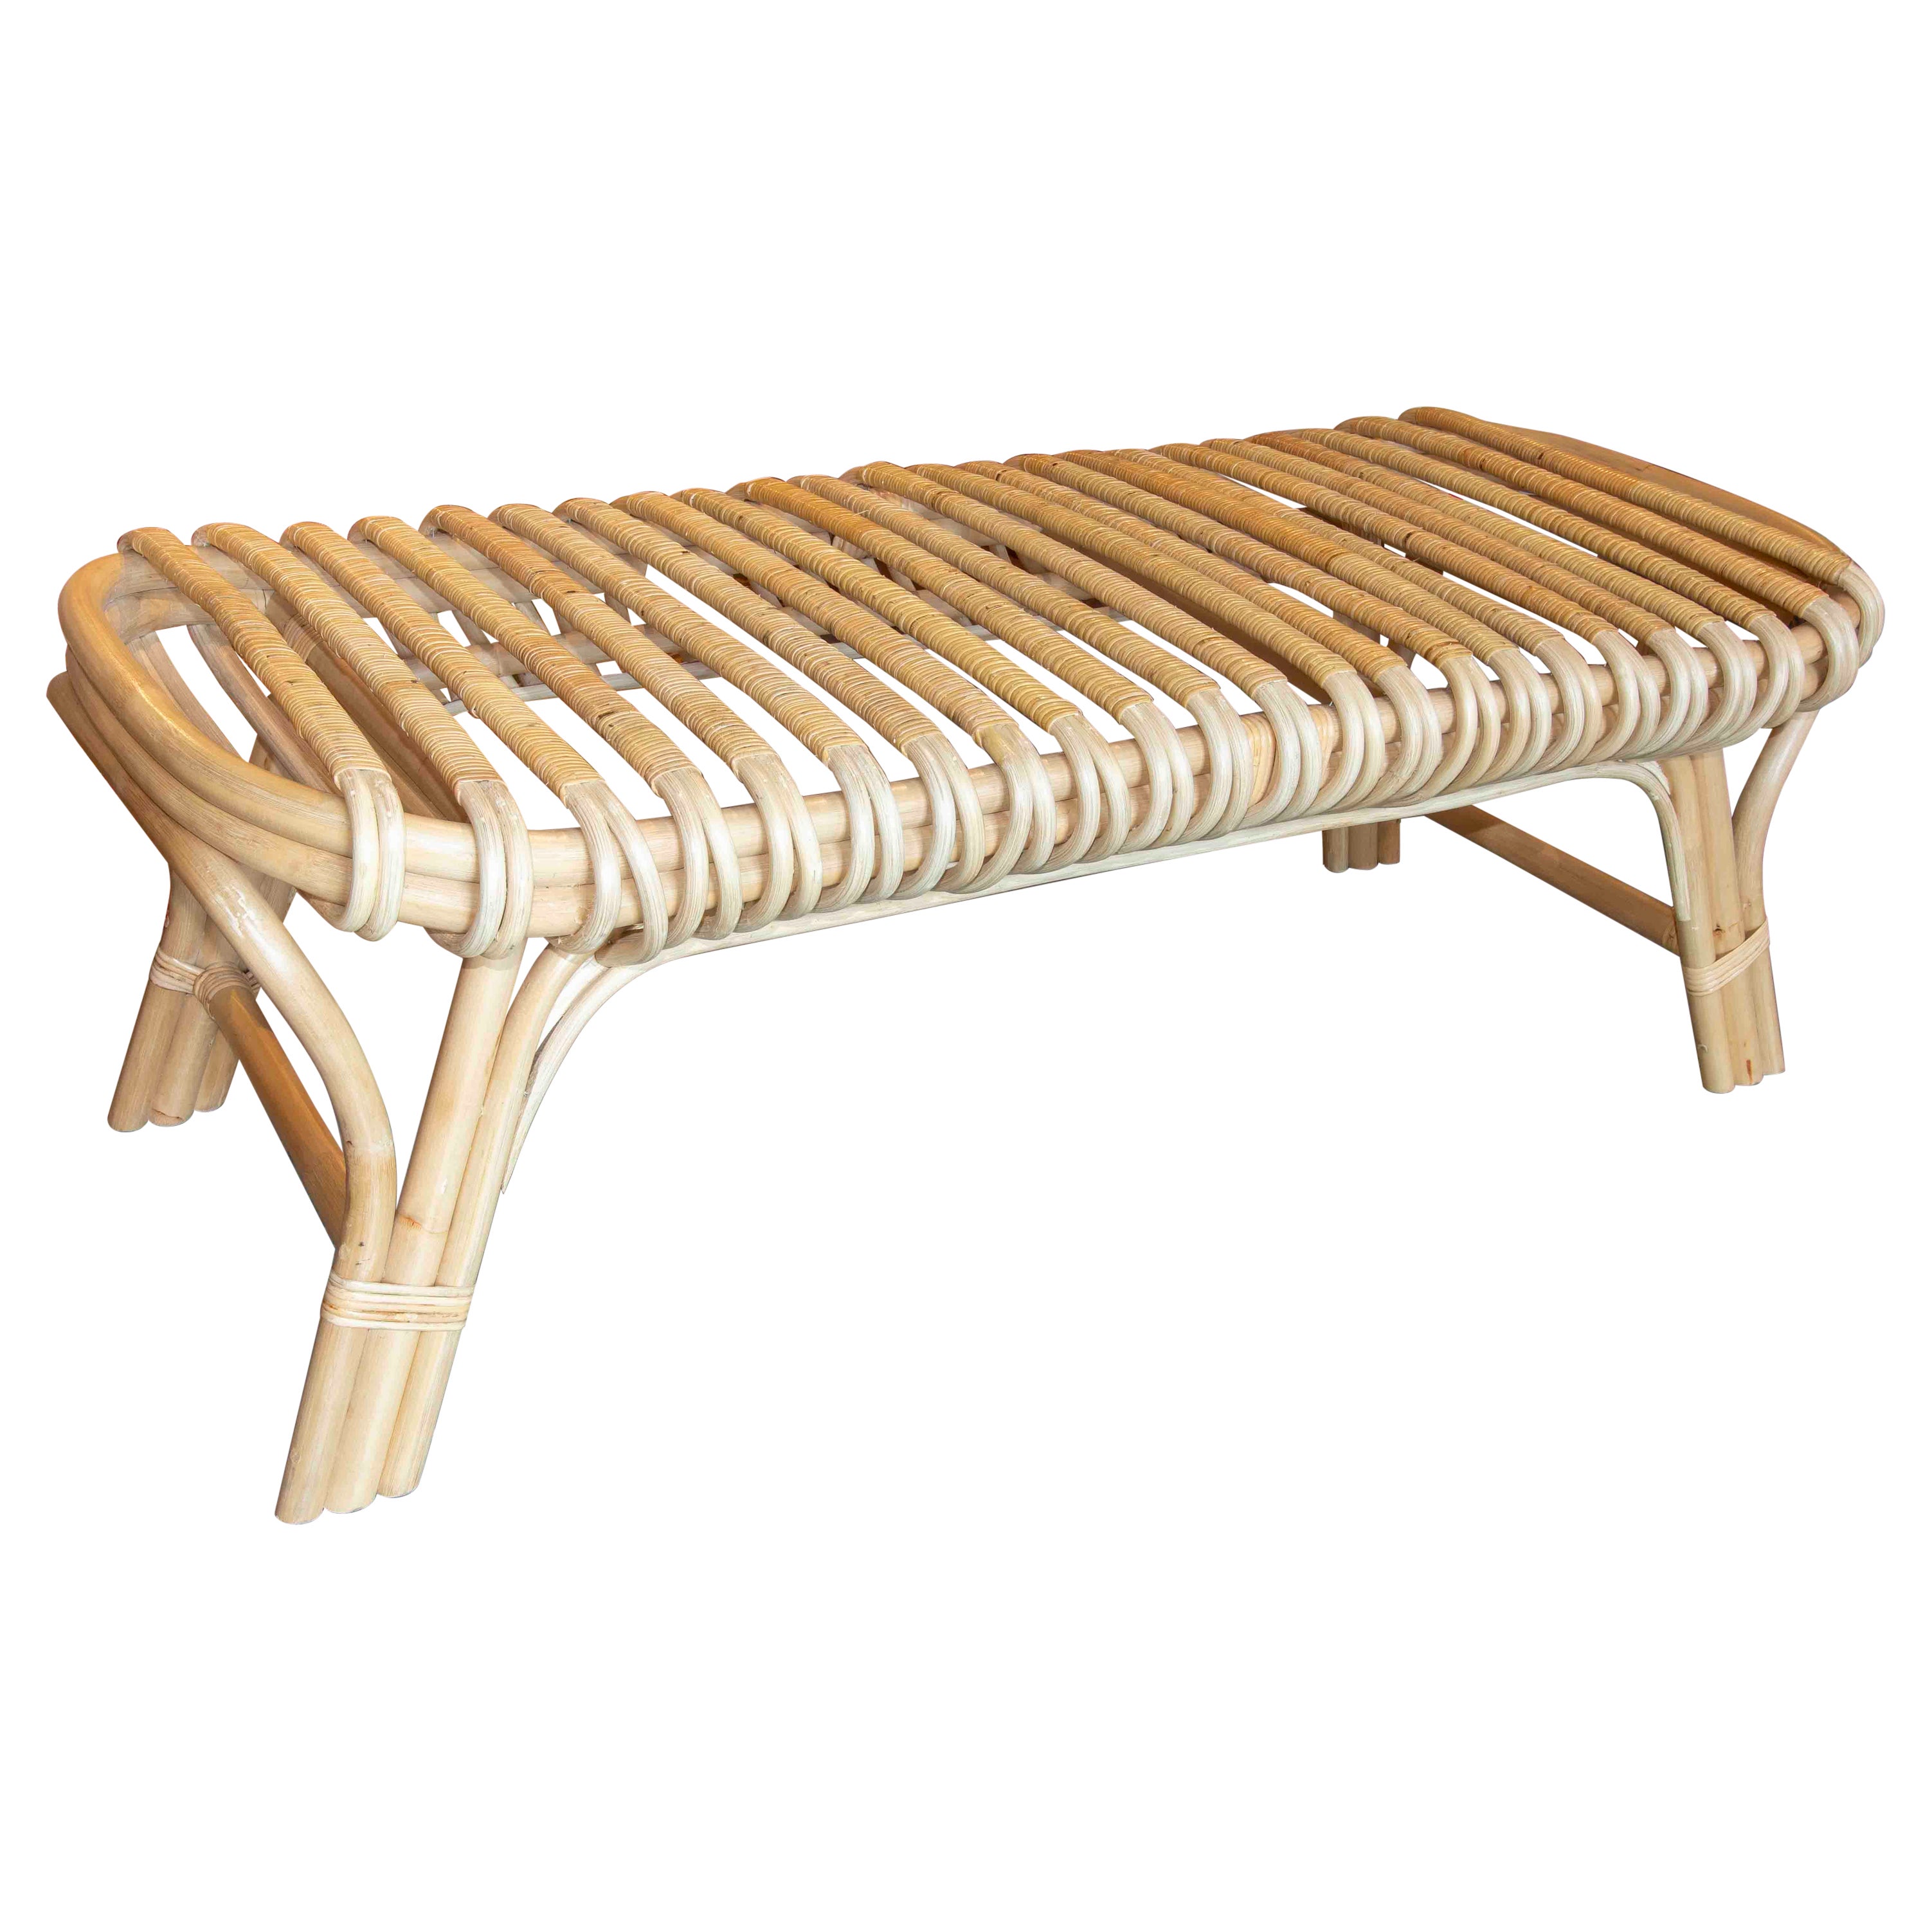 Handmade Bamboo and Wicker Rectangle Bench